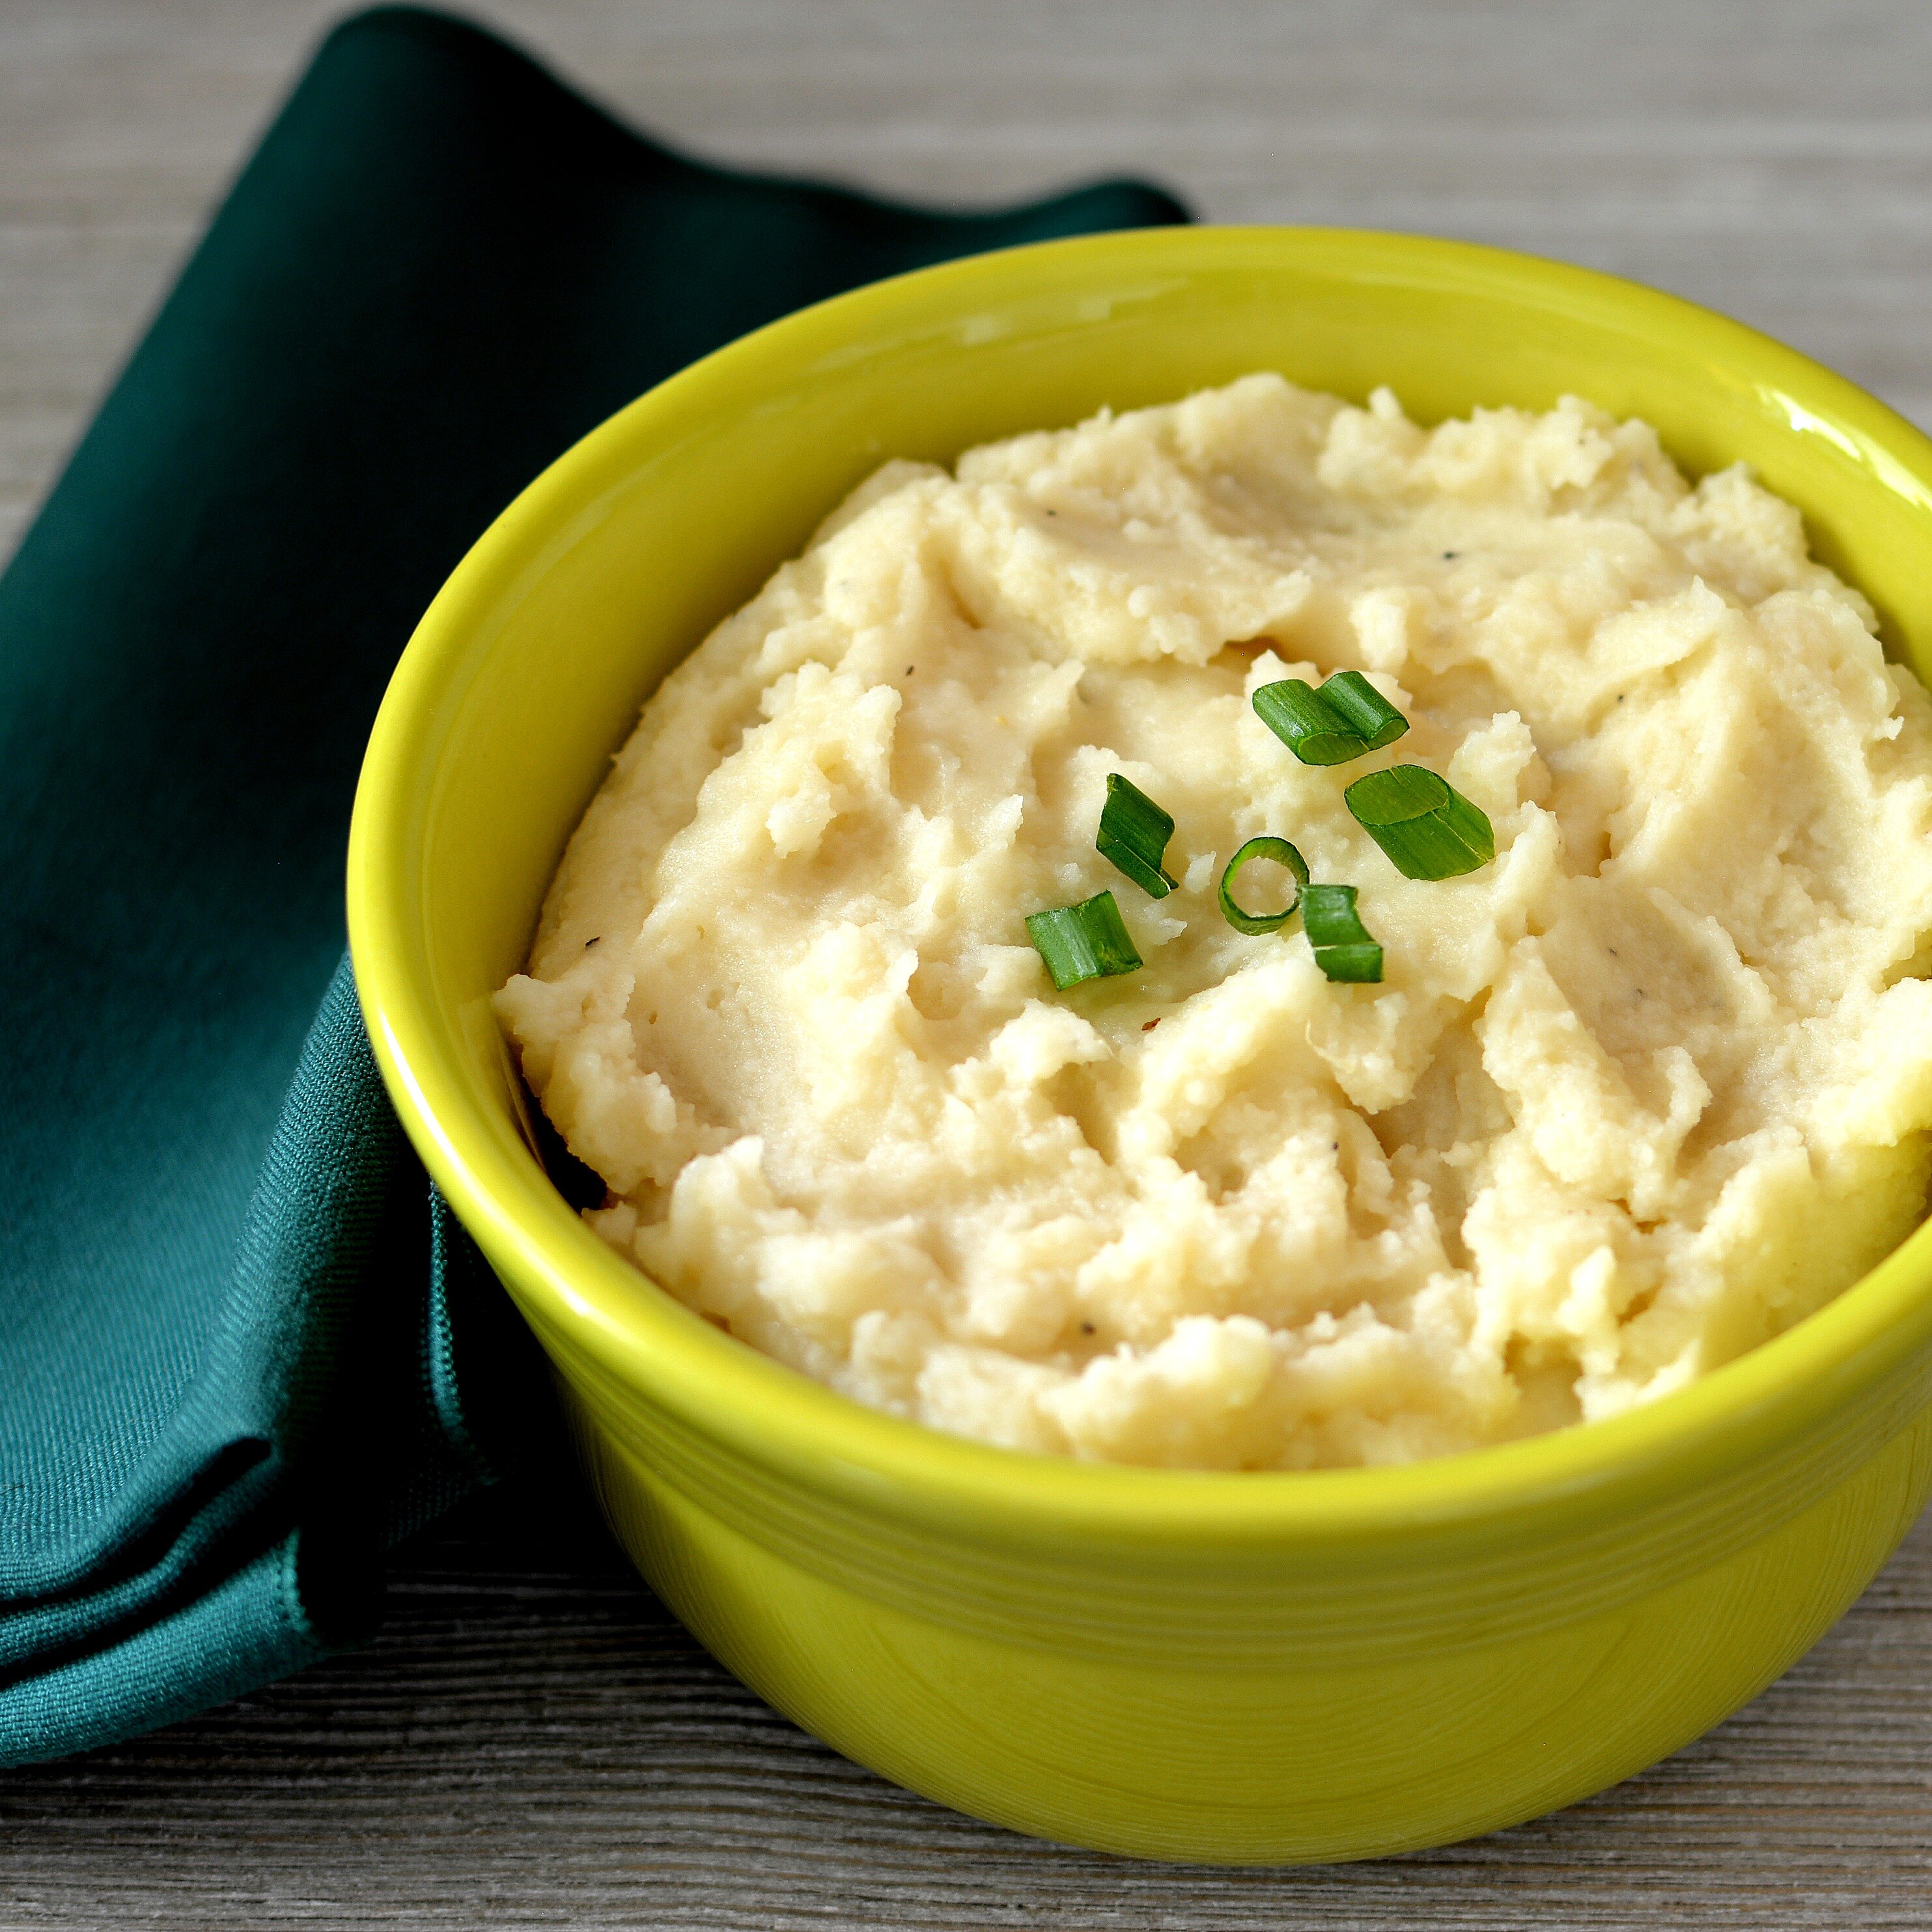 Make ahead mashed potatoes without sour cream or cream cheese Make Ahead Mashed Potatoes Recipe Allrecipes